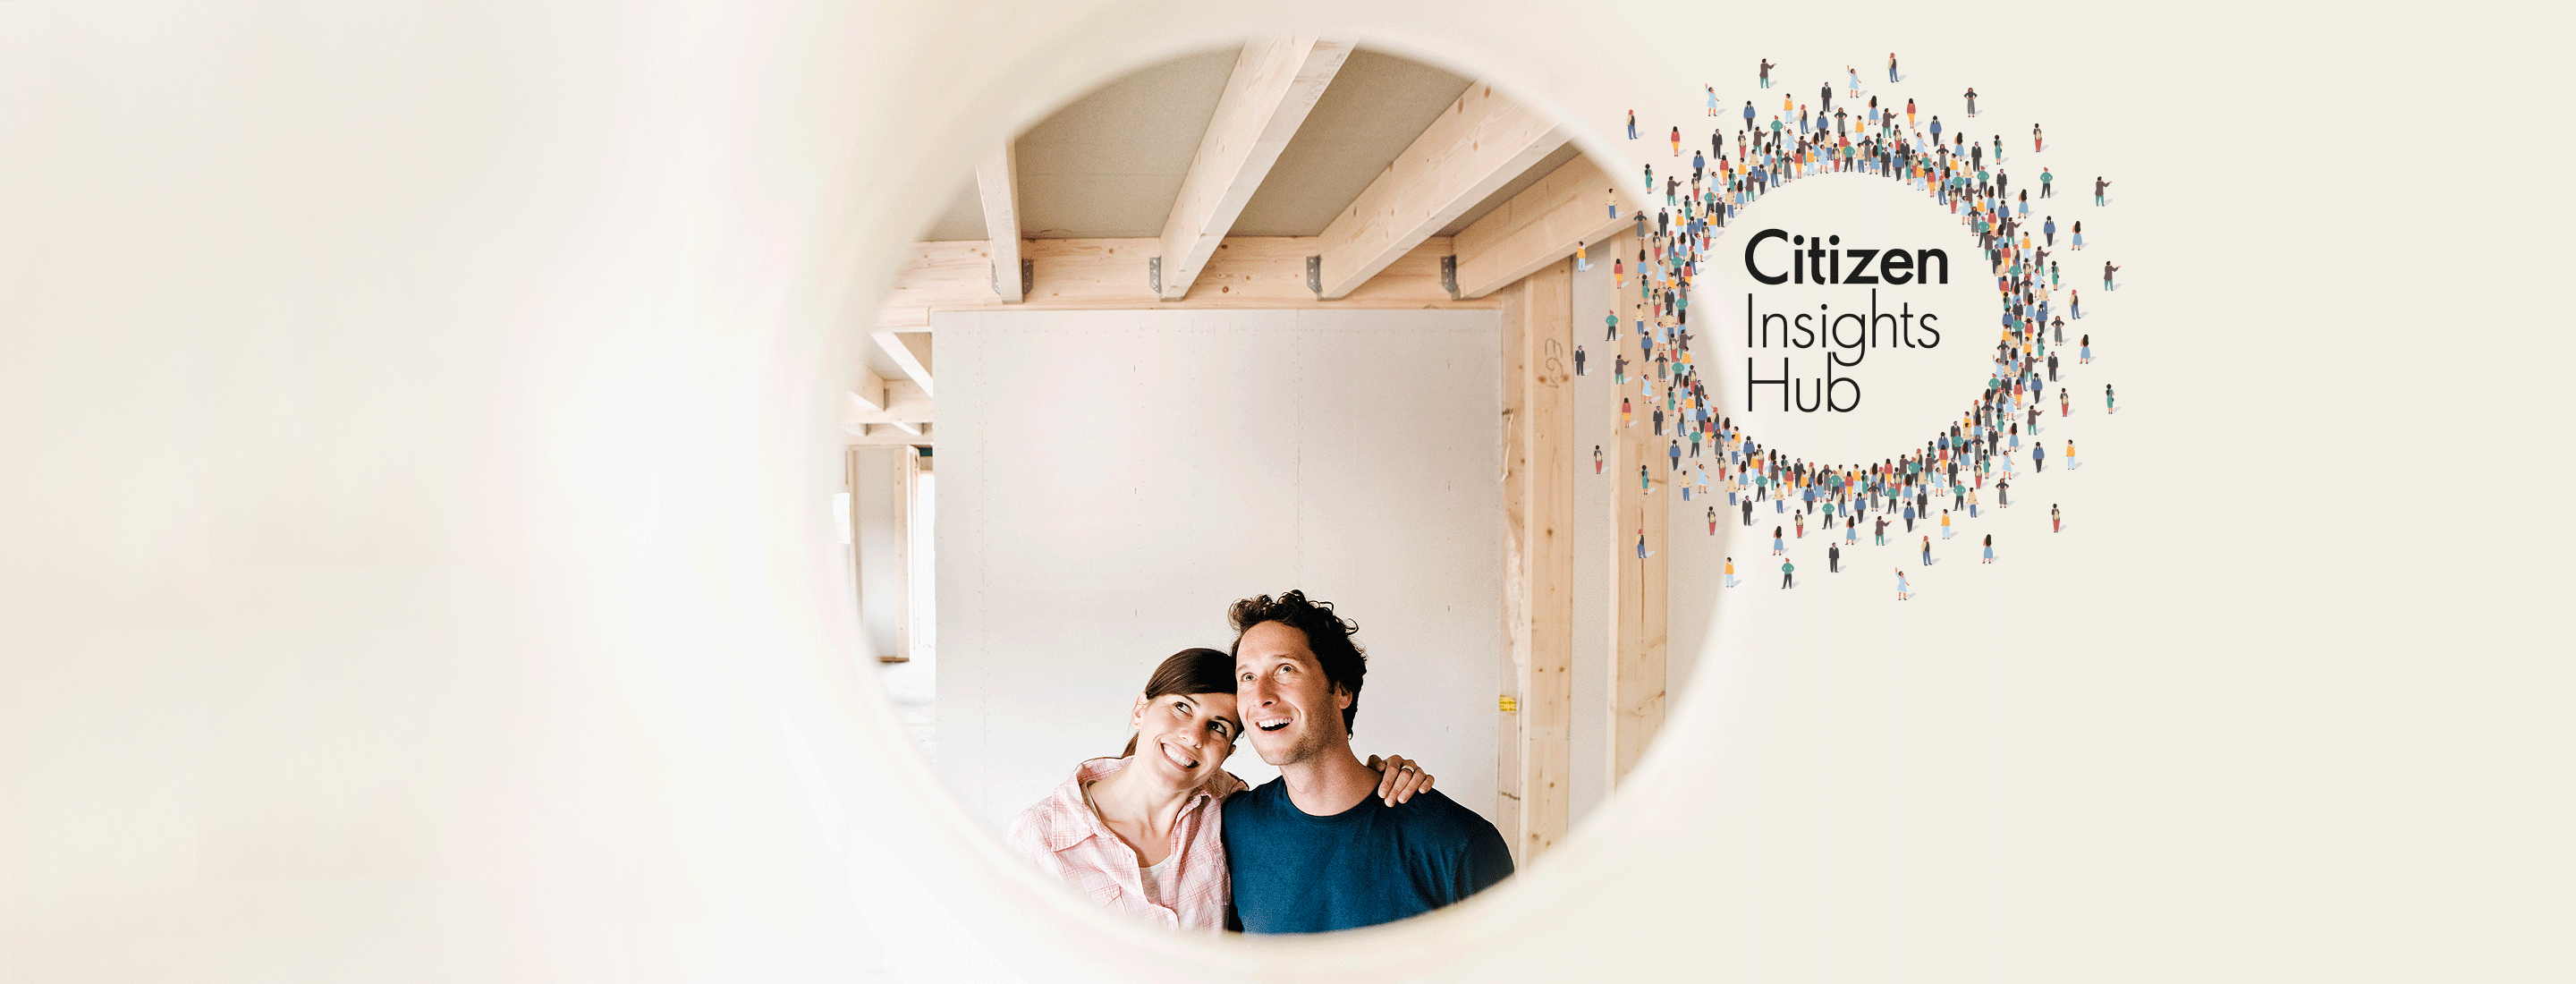 Title Citizen Insights Hub plus image of couple moving into a new home